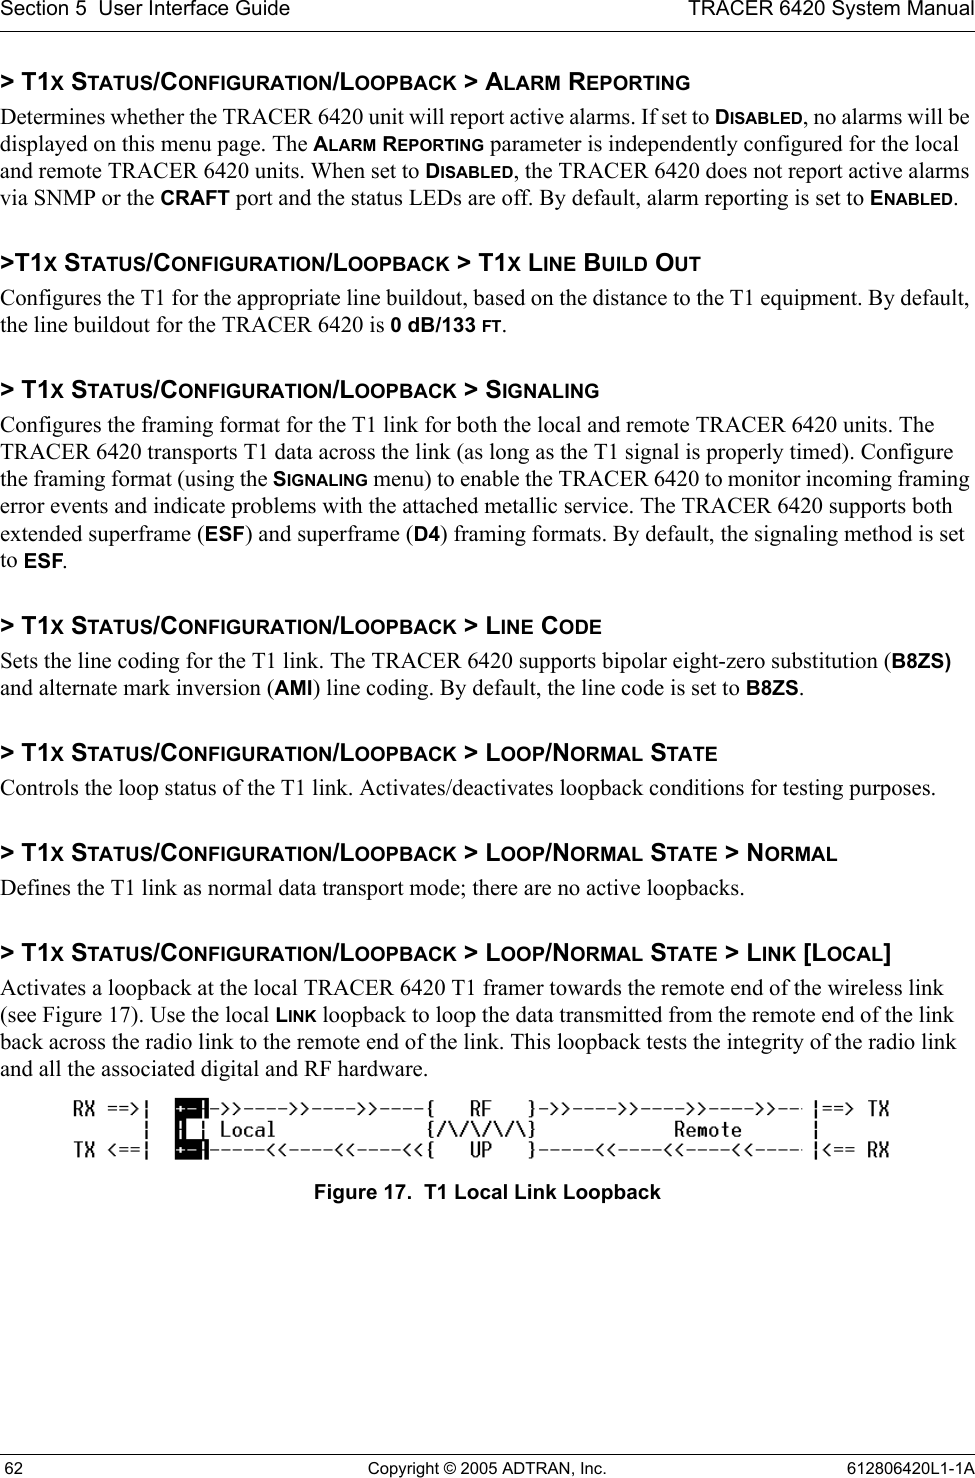 Section 5  User Interface Guide TRACER 6420 System Manual 62 Copyright © 2005 ADTRAN, Inc. 612806420L1-1A&gt; T1X STATUS/CONFIGURATION/LOOPBACK &gt; ALARM REPORTINGDetermines whether the TRACER 6420 unit will report active alarms. If set to DISABLED, no alarms will be displayed on this menu page. The ALARM REPORTING parameter is independently configured for the local and remote TRACER 6420 units. When set to DISABLED, the TRACER 6420 does not report active alarms via SNMP or the CRAFT port and the status LEDs are off. By default, alarm reporting is set to ENABLED.&gt;T1X STATUS/CONFIGURATION/LOOPBACK &gt; T1X LINE BUILD OUTConfigures the T1 for the appropriate line buildout, based on the distance to the T1 equipment. By default, the line buildout for the TRACER 6420 is 0 dB/133 FT.&gt; T1X STATUS/CONFIGURATION/LOOPBACK &gt; SIGNALINGConfigures the framing format for the T1 link for both the local and remote TRACER 6420 units. The TRACER 6420 transports T1 data across the link (as long as the T1 signal is properly timed). Configure the framing format (using the SIGNALING menu) to enable the TRACER 6420 to monitor incoming framing error events and indicate problems with the attached metallic service. The TRACER 6420 supports both extended superframe (ESF) and superframe (D4) framing formats. By default, the signaling method is set to ESF.&gt; T1X STATUS/CONFIGURATION/LOOPBACK &gt; LINE CODESets the line coding for the T1 link. The TRACER 6420 supports bipolar eight-zero substitution (B8ZS) and alternate mark inversion (AMI) line coding. By default, the line code is set to B8ZS.&gt; T1X STATUS/CONFIGURATION/LOOPBACK &gt; LOOP/NORMAL STATEControls the loop status of the T1 link. Activates/deactivates loopback conditions for testing purposes.&gt; T1X STATUS/CONFIGURATION/LOOPBACK &gt; LOOP/NORMAL STATE &gt; NORMALDefines the T1 link as normal data transport mode; there are no active loopbacks.&gt; T1X STATUS/CONFIGURATION/LOOPBACK &gt; LOOP/NORMAL STATE &gt; LINK [LOCAL]Activates a loopback at the local TRACER 6420 T1 framer towards the remote end of the wireless link (see Figure 17). Use the local LINK loopback to loop the data transmitted from the remote end of the link back across the radio link to the remote end of the link. This loopback tests the integrity of the radio link and all the associated digital and RF hardware.Figure 17.  T1 Local Link Loopback